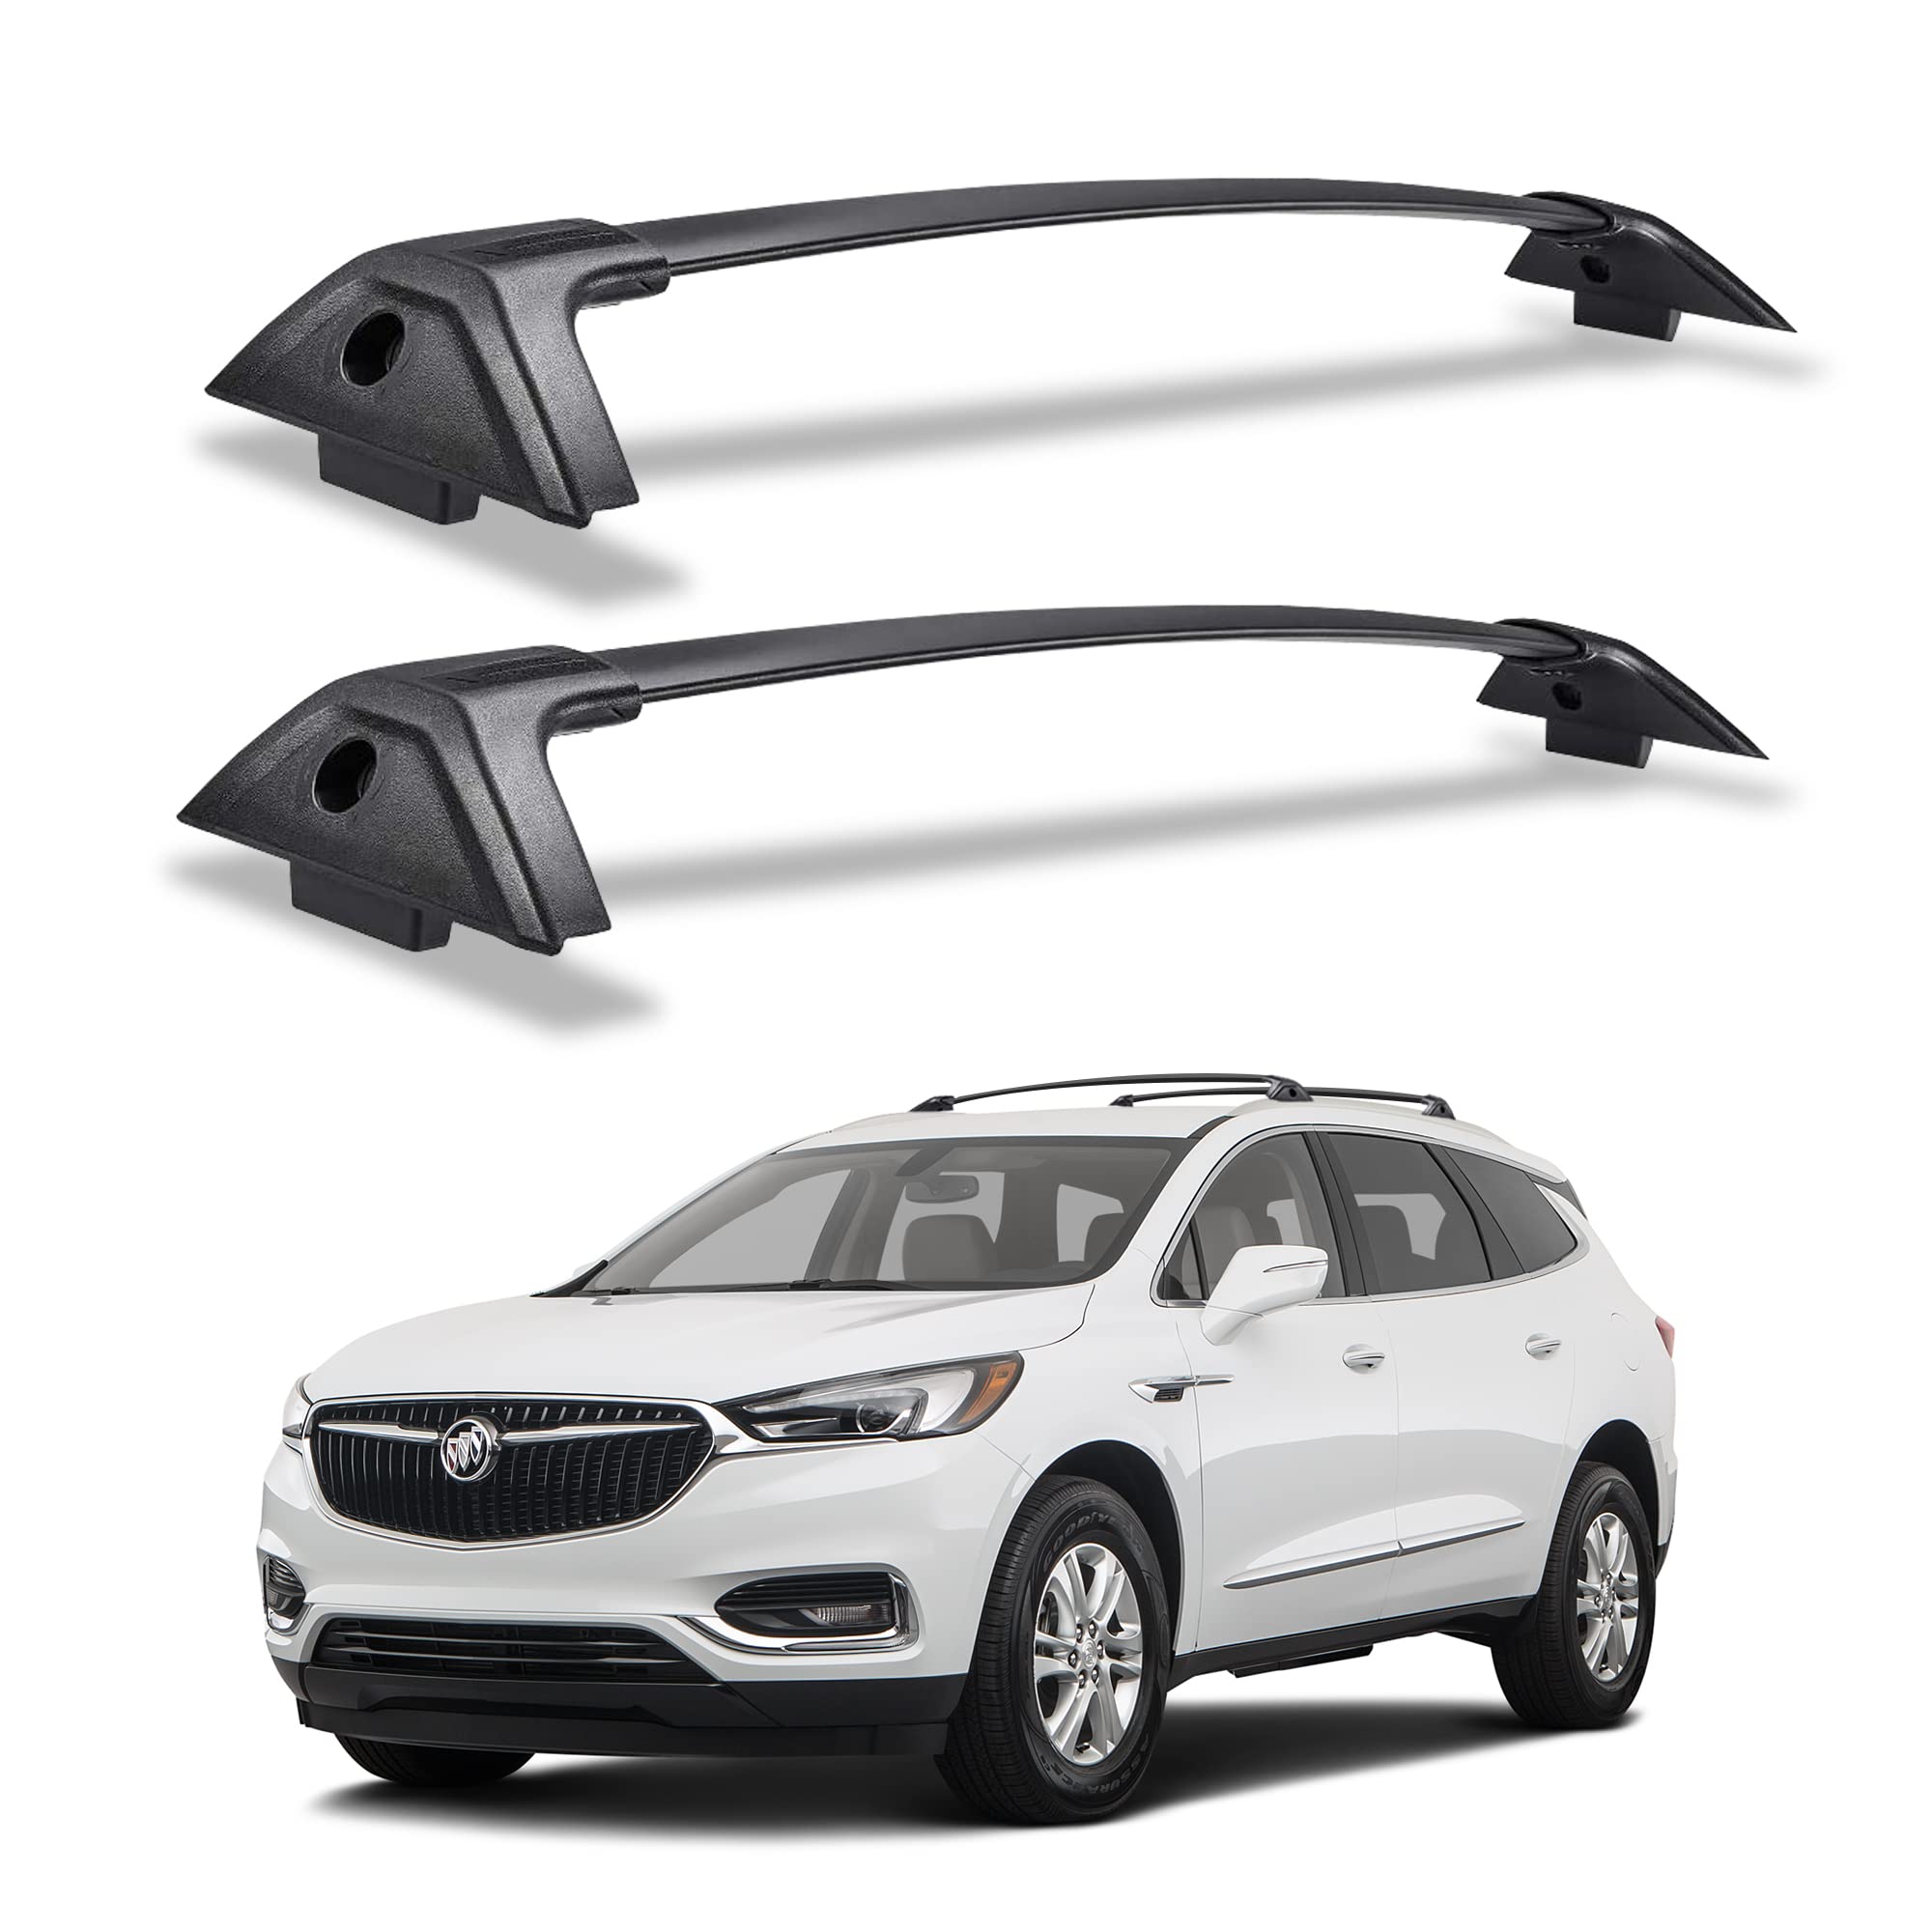 Car Roof Rack Crossbars - for Buick Envision 2016-2020 Automotive Exterior  Accessories - Cargo Carrier for Top